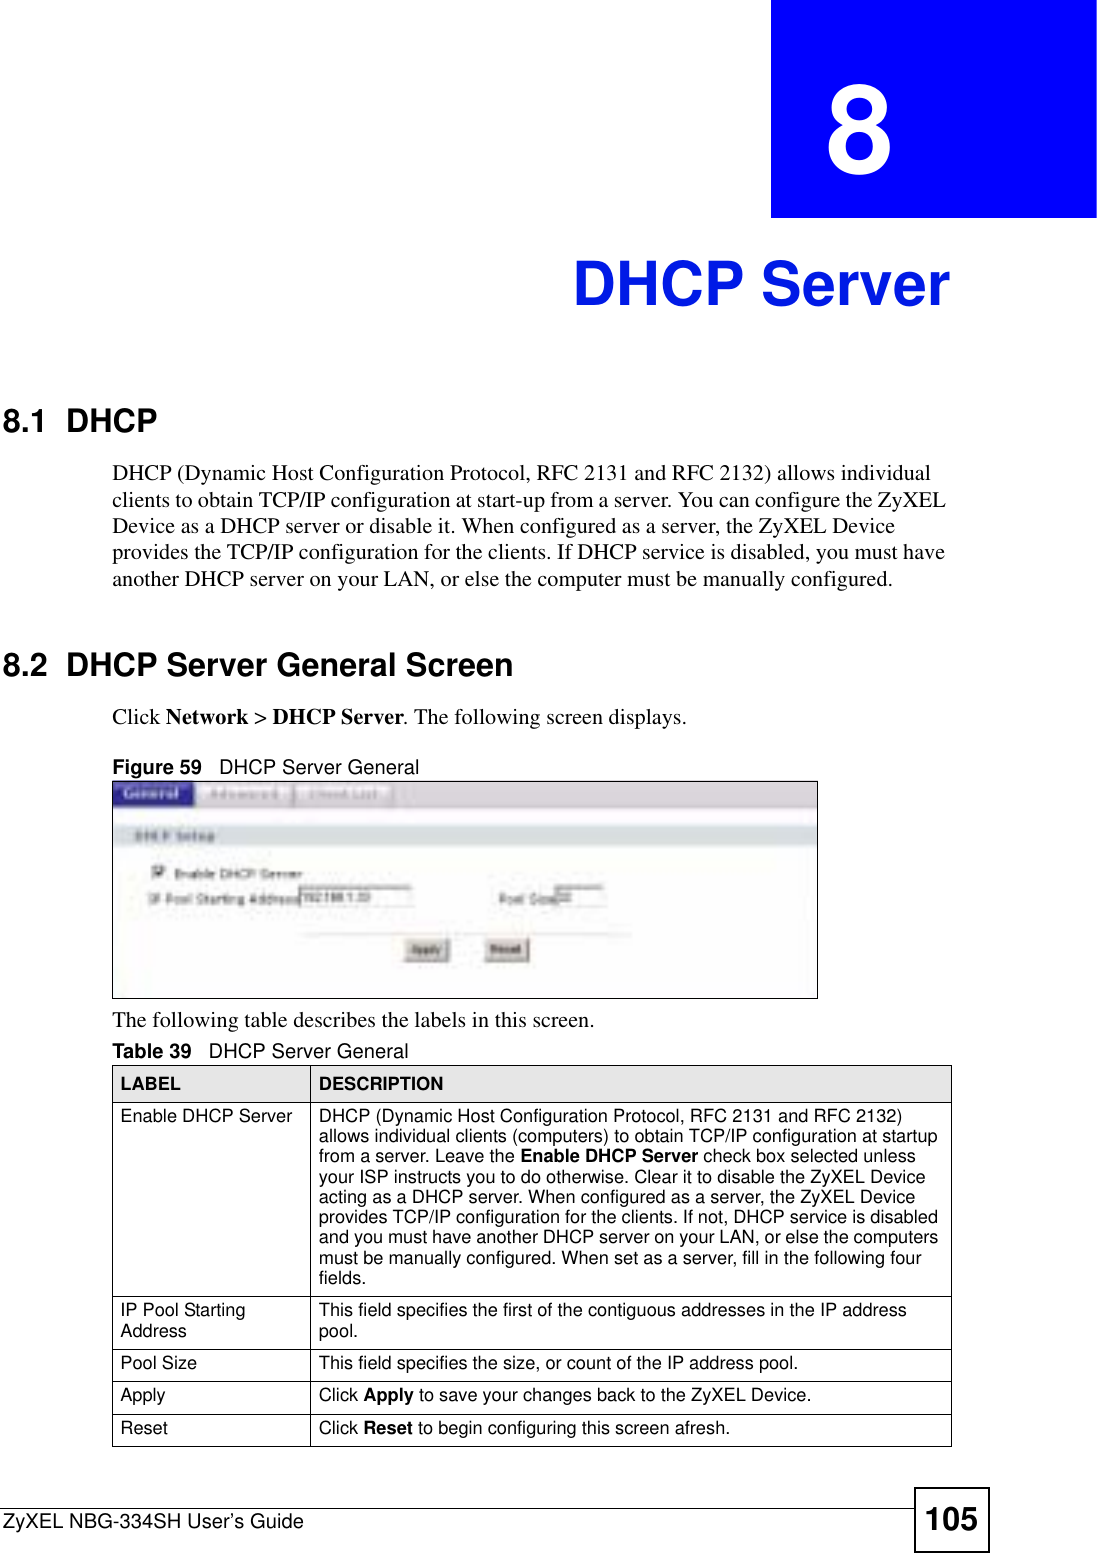 ZyXEL NBG-334SH User’s Guide 105CHAPTER  8 DHCP Server8.1  DHCPDHCP (Dynamic Host Configuration Protocol, RFC 2131 and RFC 2132) allows individual clients to obtain TCP/IP configuration at start-up from a server. You can configure the ZyXEL Device as a DHCP server or disable it. When configured as a server, the ZyXEL Device provides the TCP/IP configuration for the clients. If DHCP service is disabled, you must have another DHCP server on your LAN, or else the computer must be manually configured.8.2  DHCP Server General ScreenClick Network &gt; DHCP Server. The following screen displays.Figure 59   DHCP Server GeneralThe following table describes the labels in this screen.Table 39   DHCP Server GeneralLABEL DESCRIPTIONEnable DHCP Server DHCP (Dynamic Host Configuration Protocol, RFC 2131 and RFC 2132) allows individual clients (computers) to obtain TCP/IP configuration at startup from a server. Leave the Enable DHCP Server check box selected unless your ISP instructs you to do otherwise. Clear it to disable the ZyXEL Device acting as a DHCP server. When configured as a server, the ZyXEL Device provides TCP/IP configuration for the clients. If not, DHCP service is disabled and you must have another DHCP server on your LAN, or else the computers must be manually configured. When set as a server, fill in the following four fields.IP Pool Starting Address This field specifies the first of the contiguous addresses in the IP address pool.Pool Size This field specifies the size, or count of the IP address pool.Apply Click Apply to save your changes back to the ZyXEL Device.Reset Click Reset to begin configuring this screen afresh.